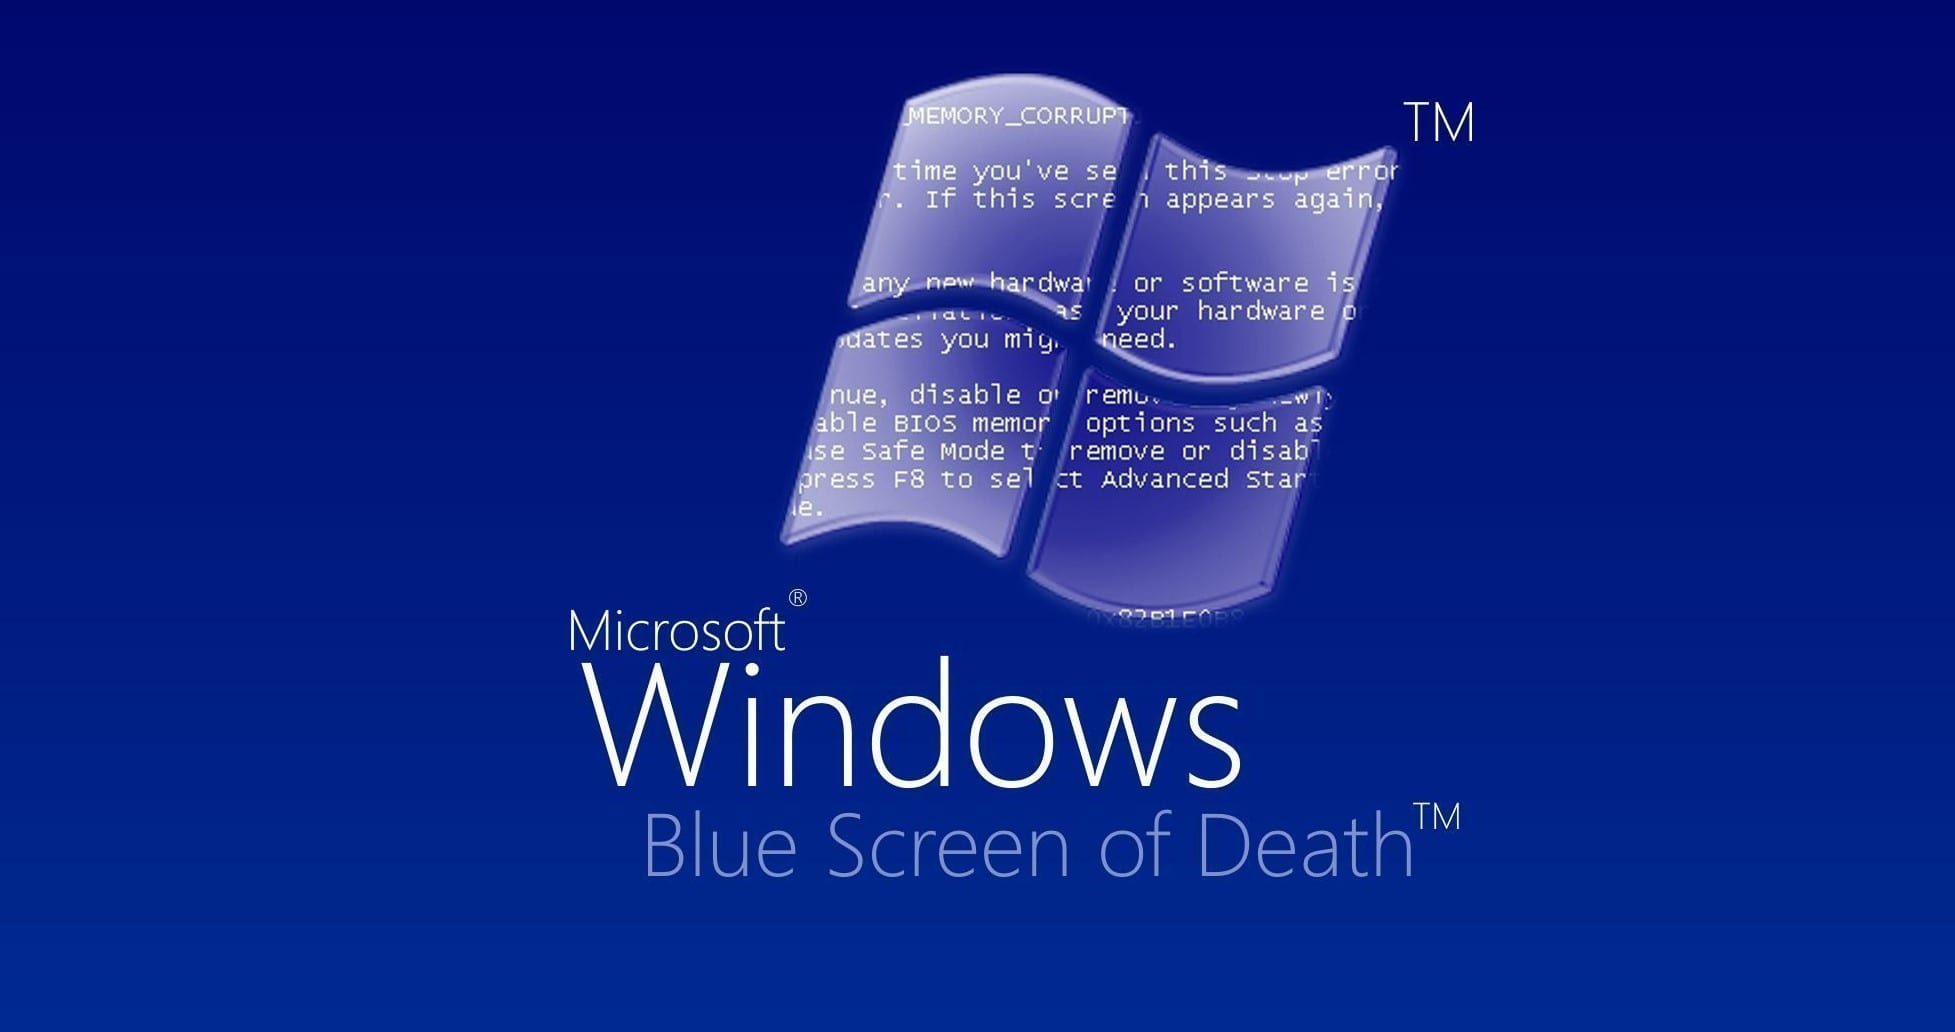 Blue Screen of Death causes downtime